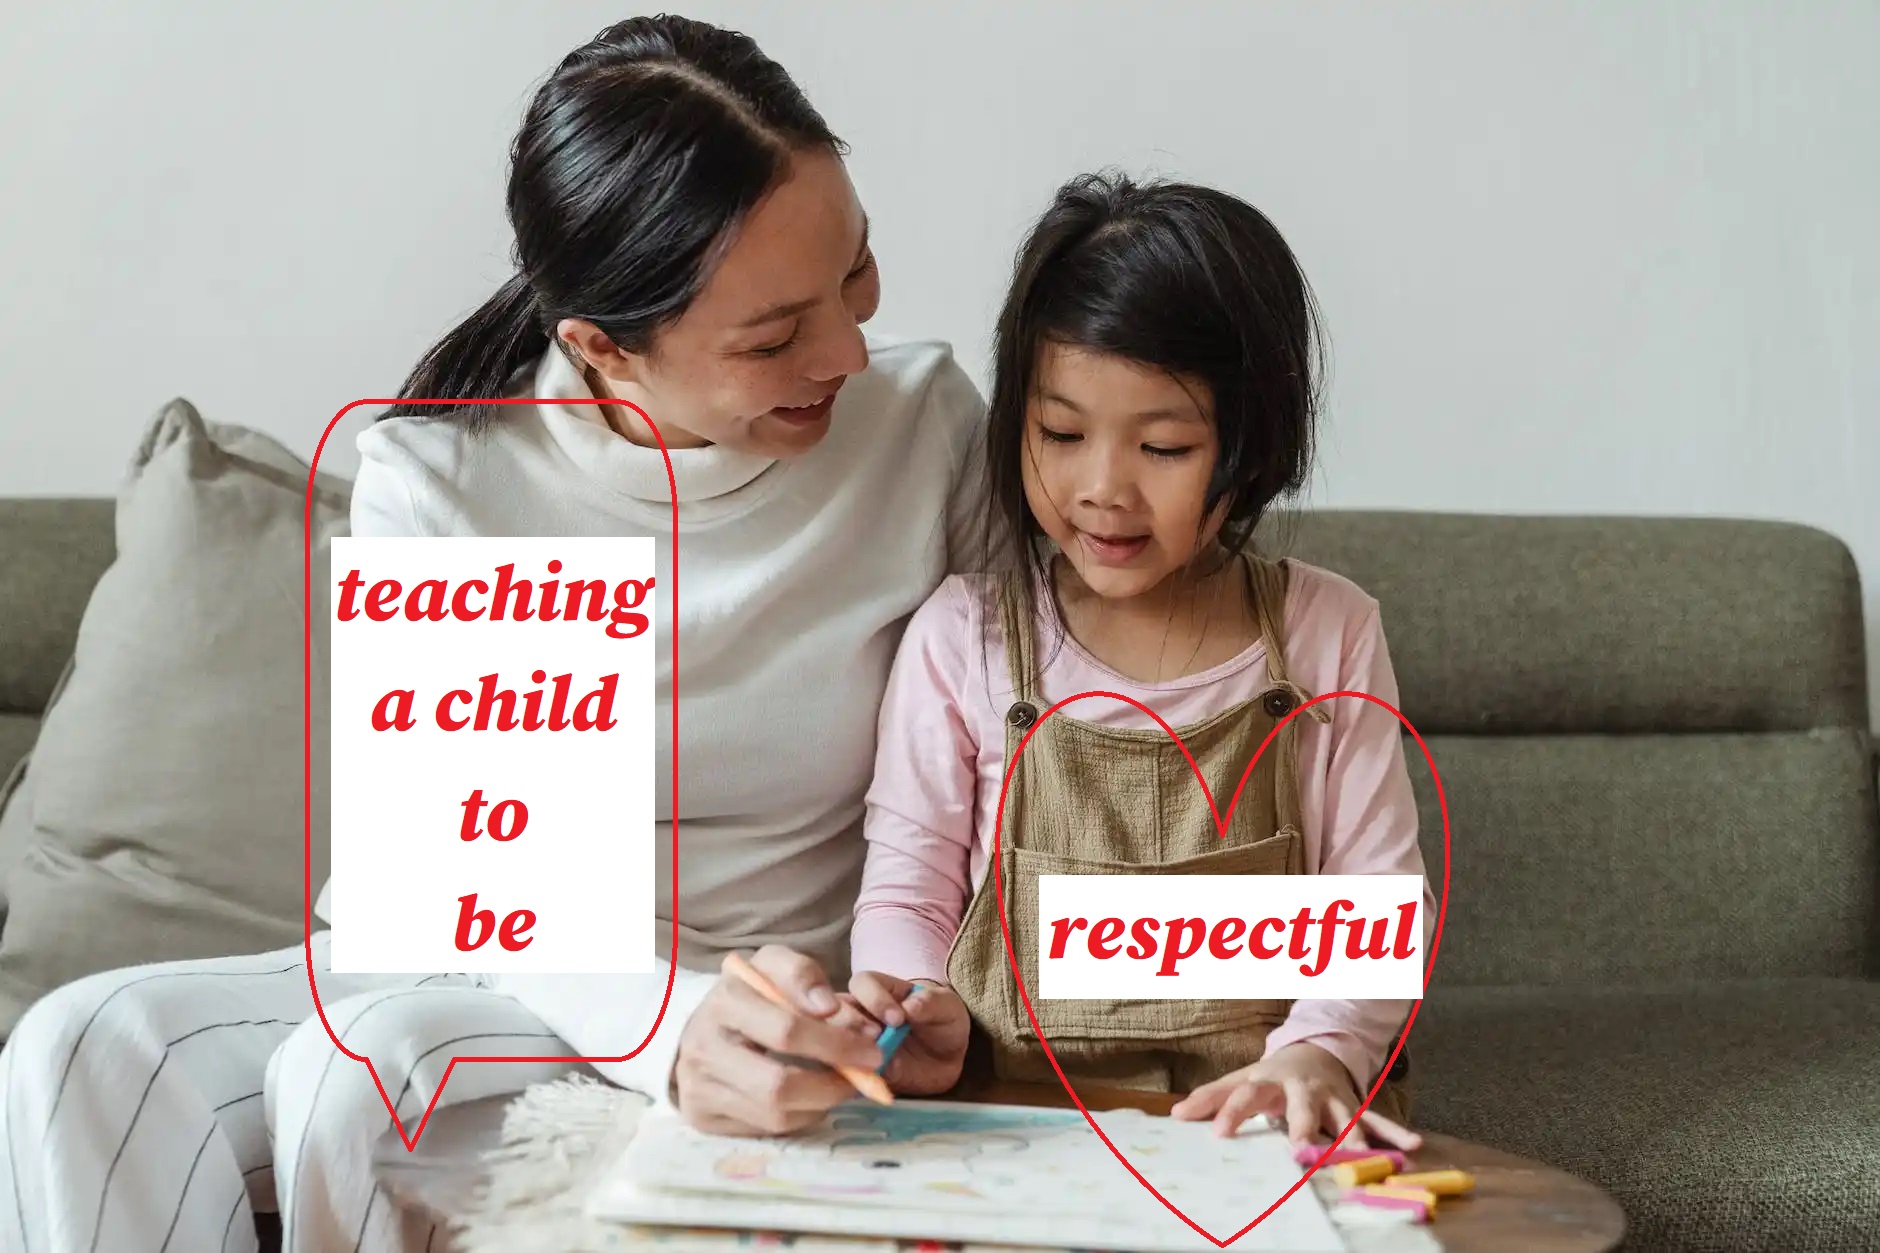 Teaching children to be respectful is an important aspect of their social and emotional development